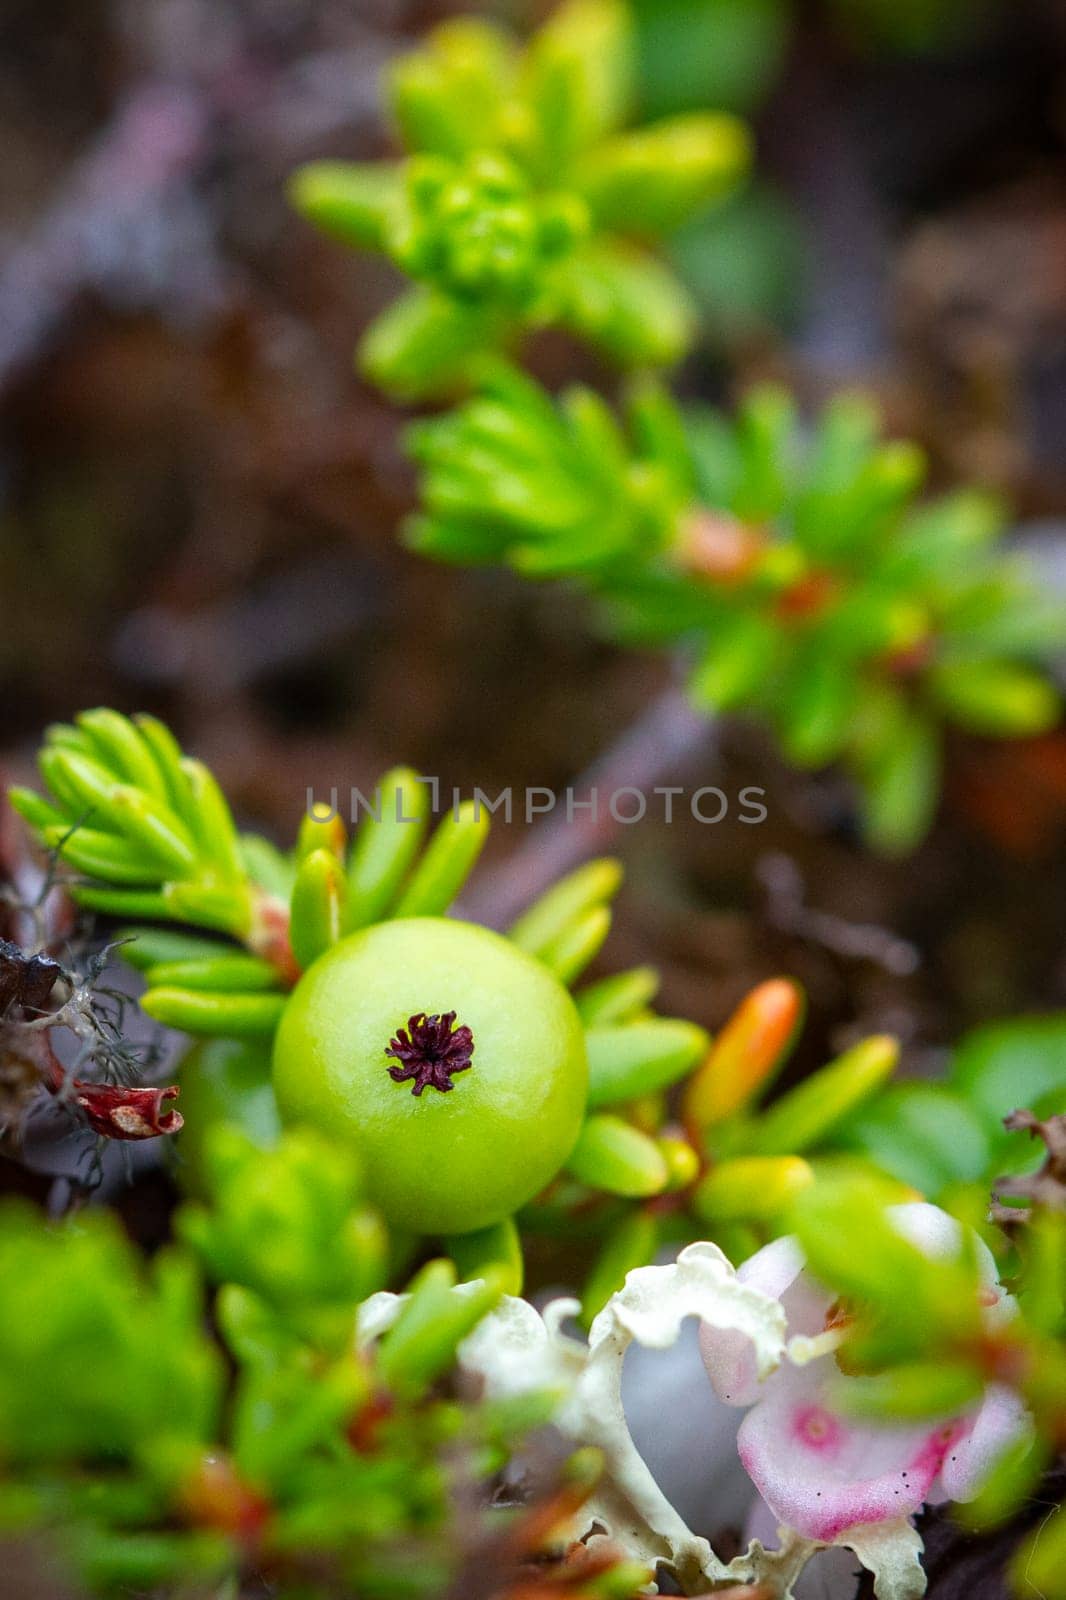 Crowberry, also known as blackberry, in its green phase before ripening, found on the arctic tundra with other plants in the background, Nunavut, Canada